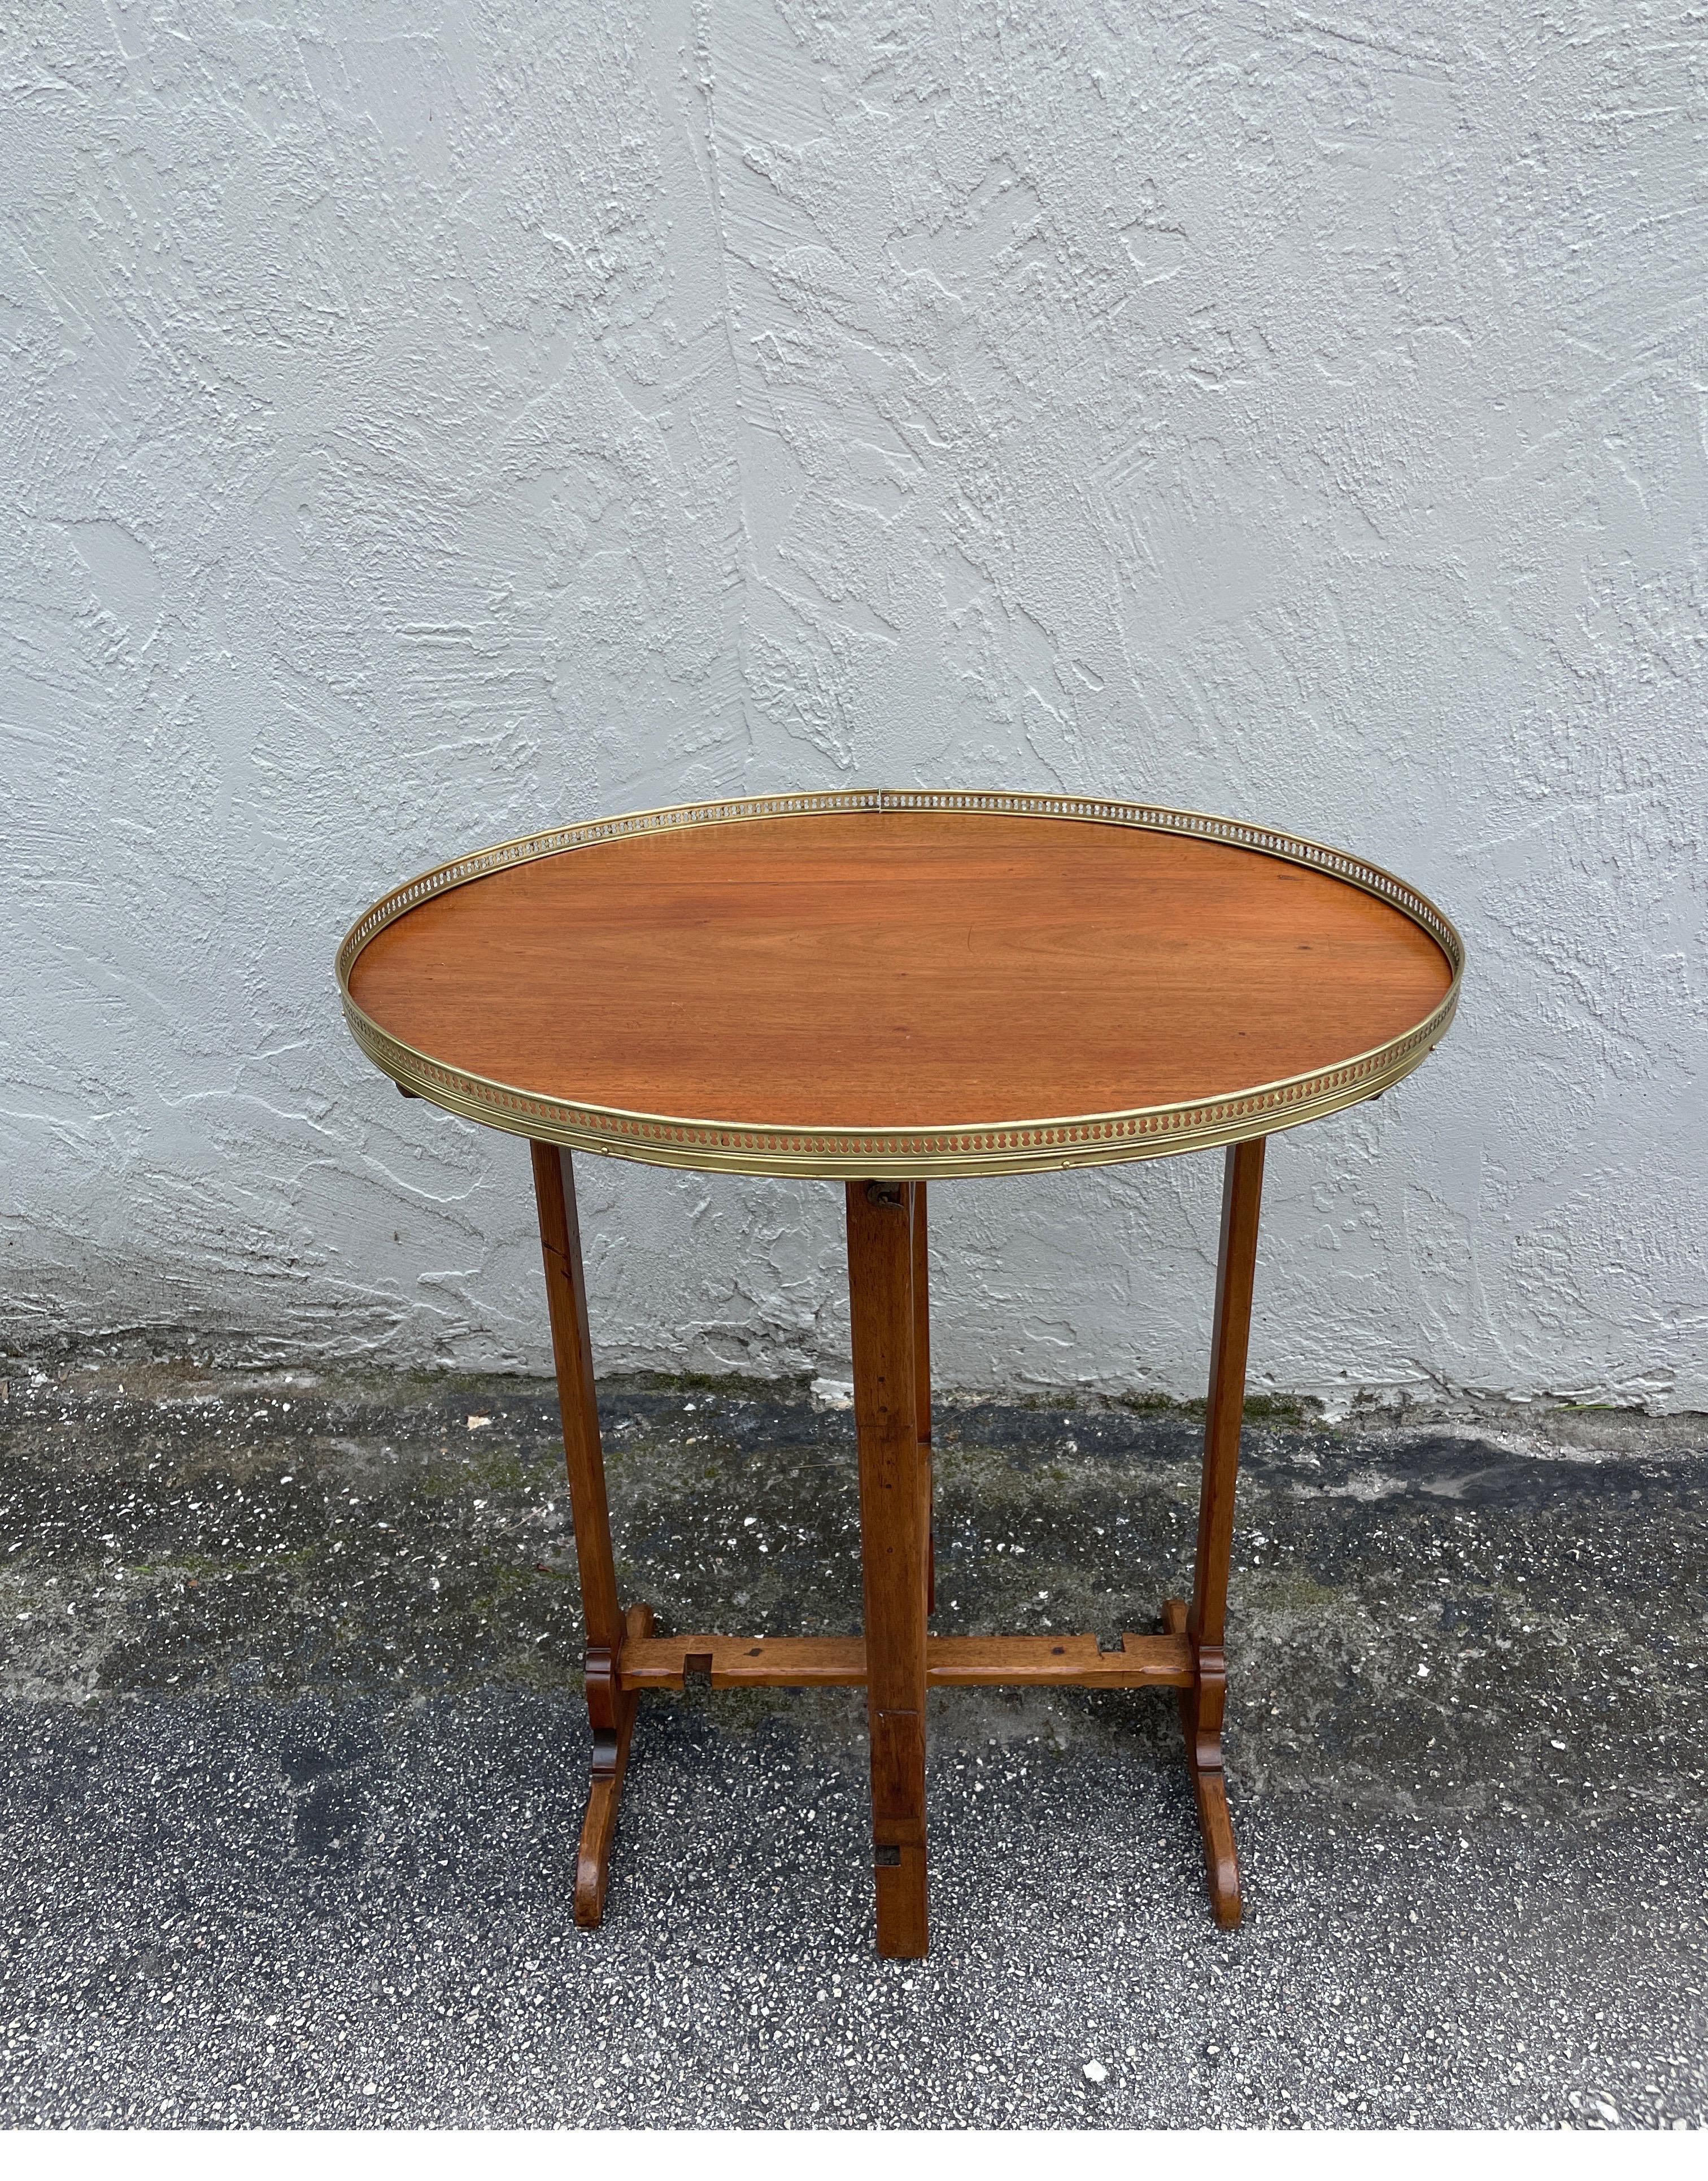 Fruitwood Antique French Tilt Top Galleried Dessert Table For Sale